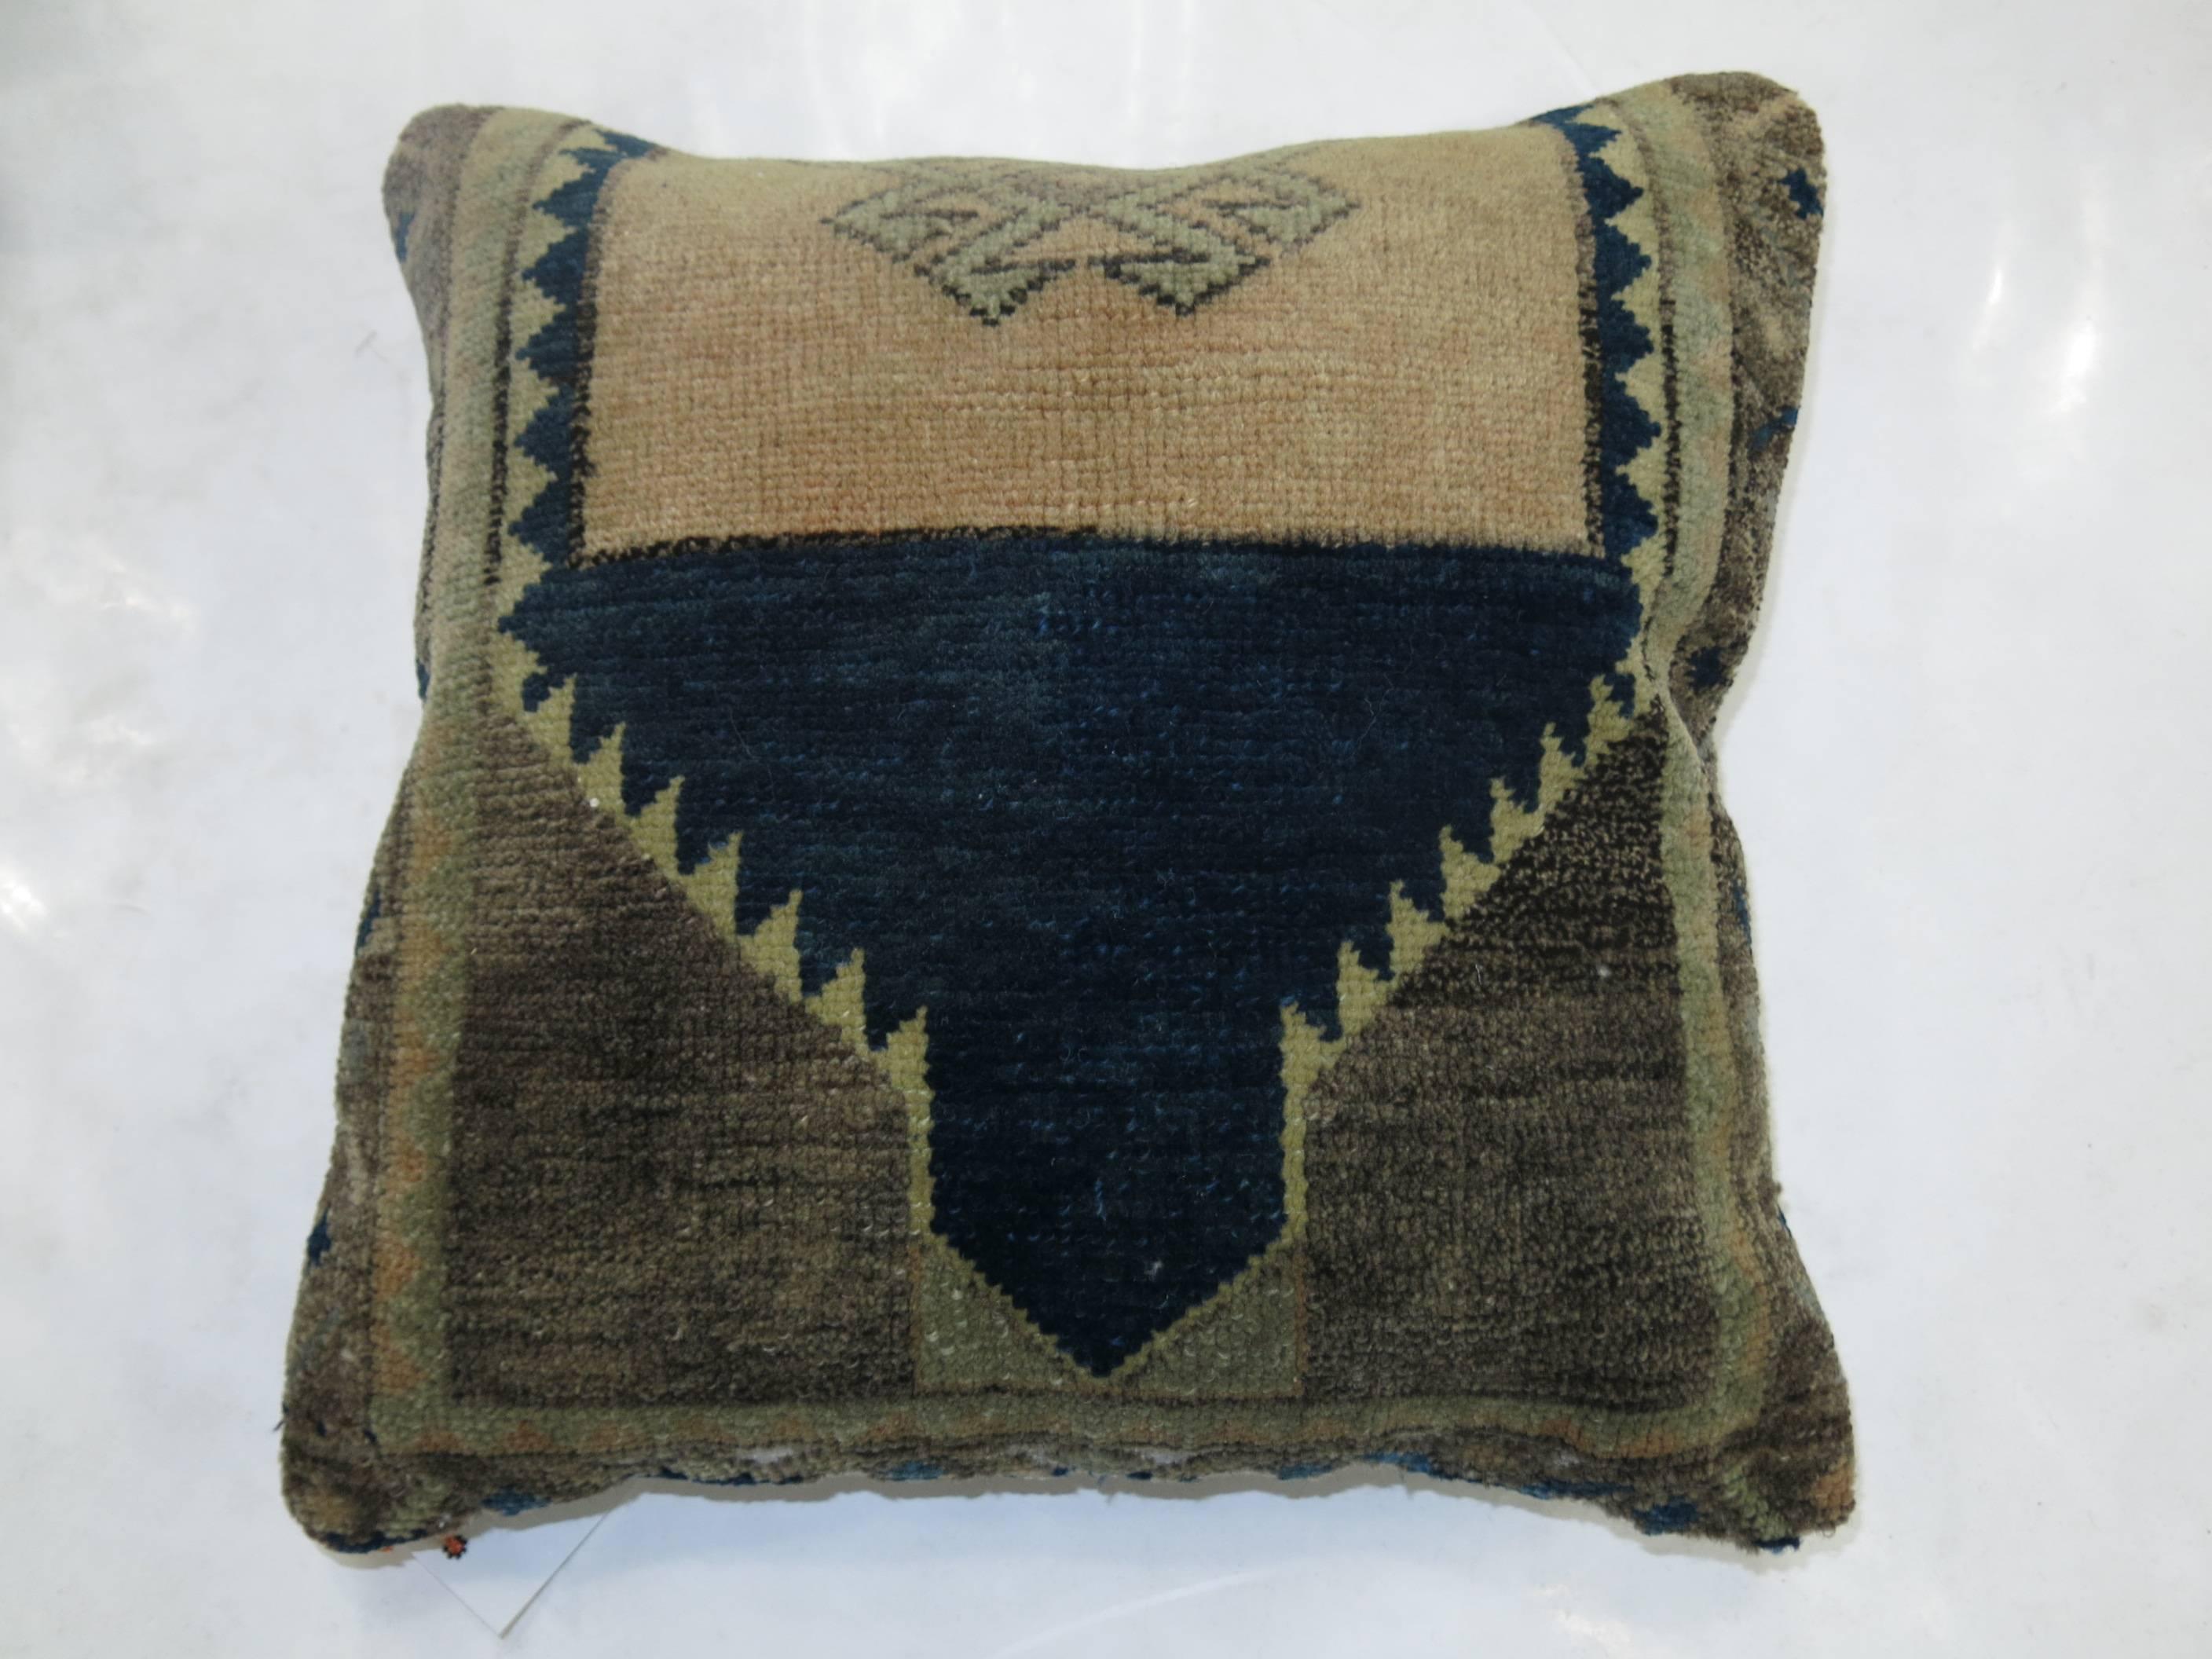 Pillows made from a set of Turkish rugs in beige, blue, green and tan accents. Measuring 17” x 18” & 16” x 16” respectively.